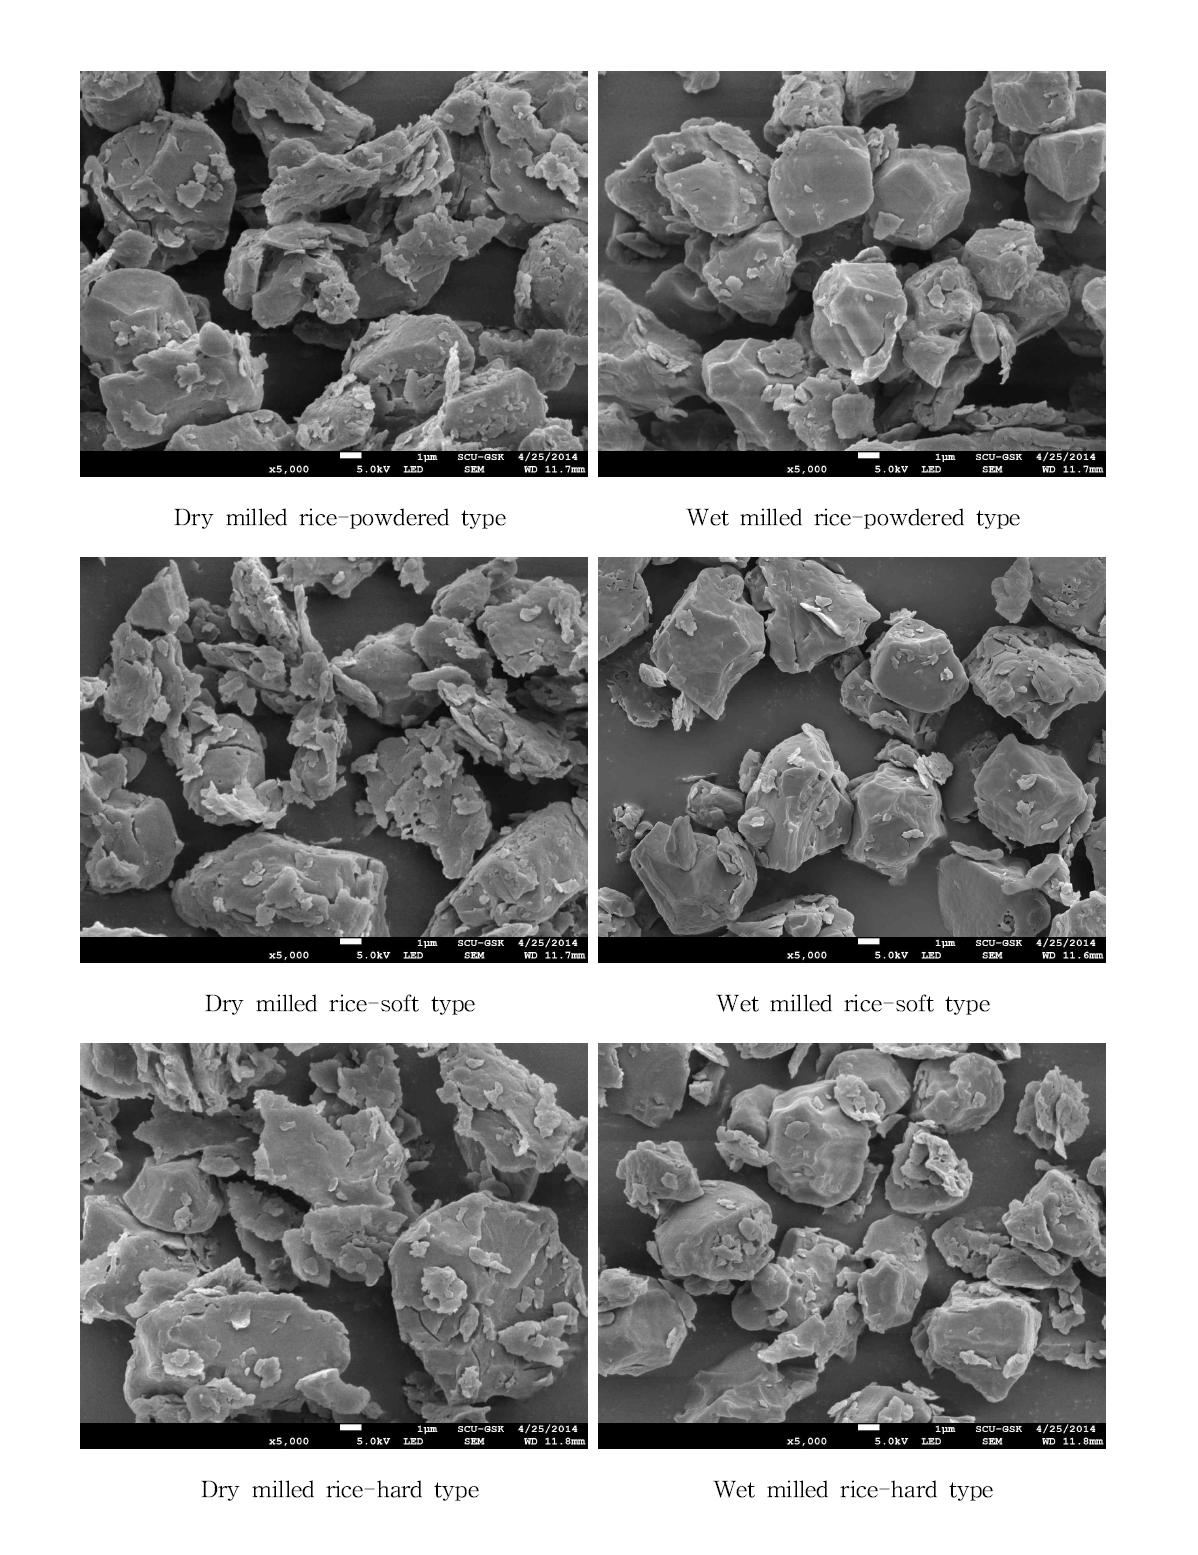 Scanning electronic microphotographs of rice flour by different grinding methods.